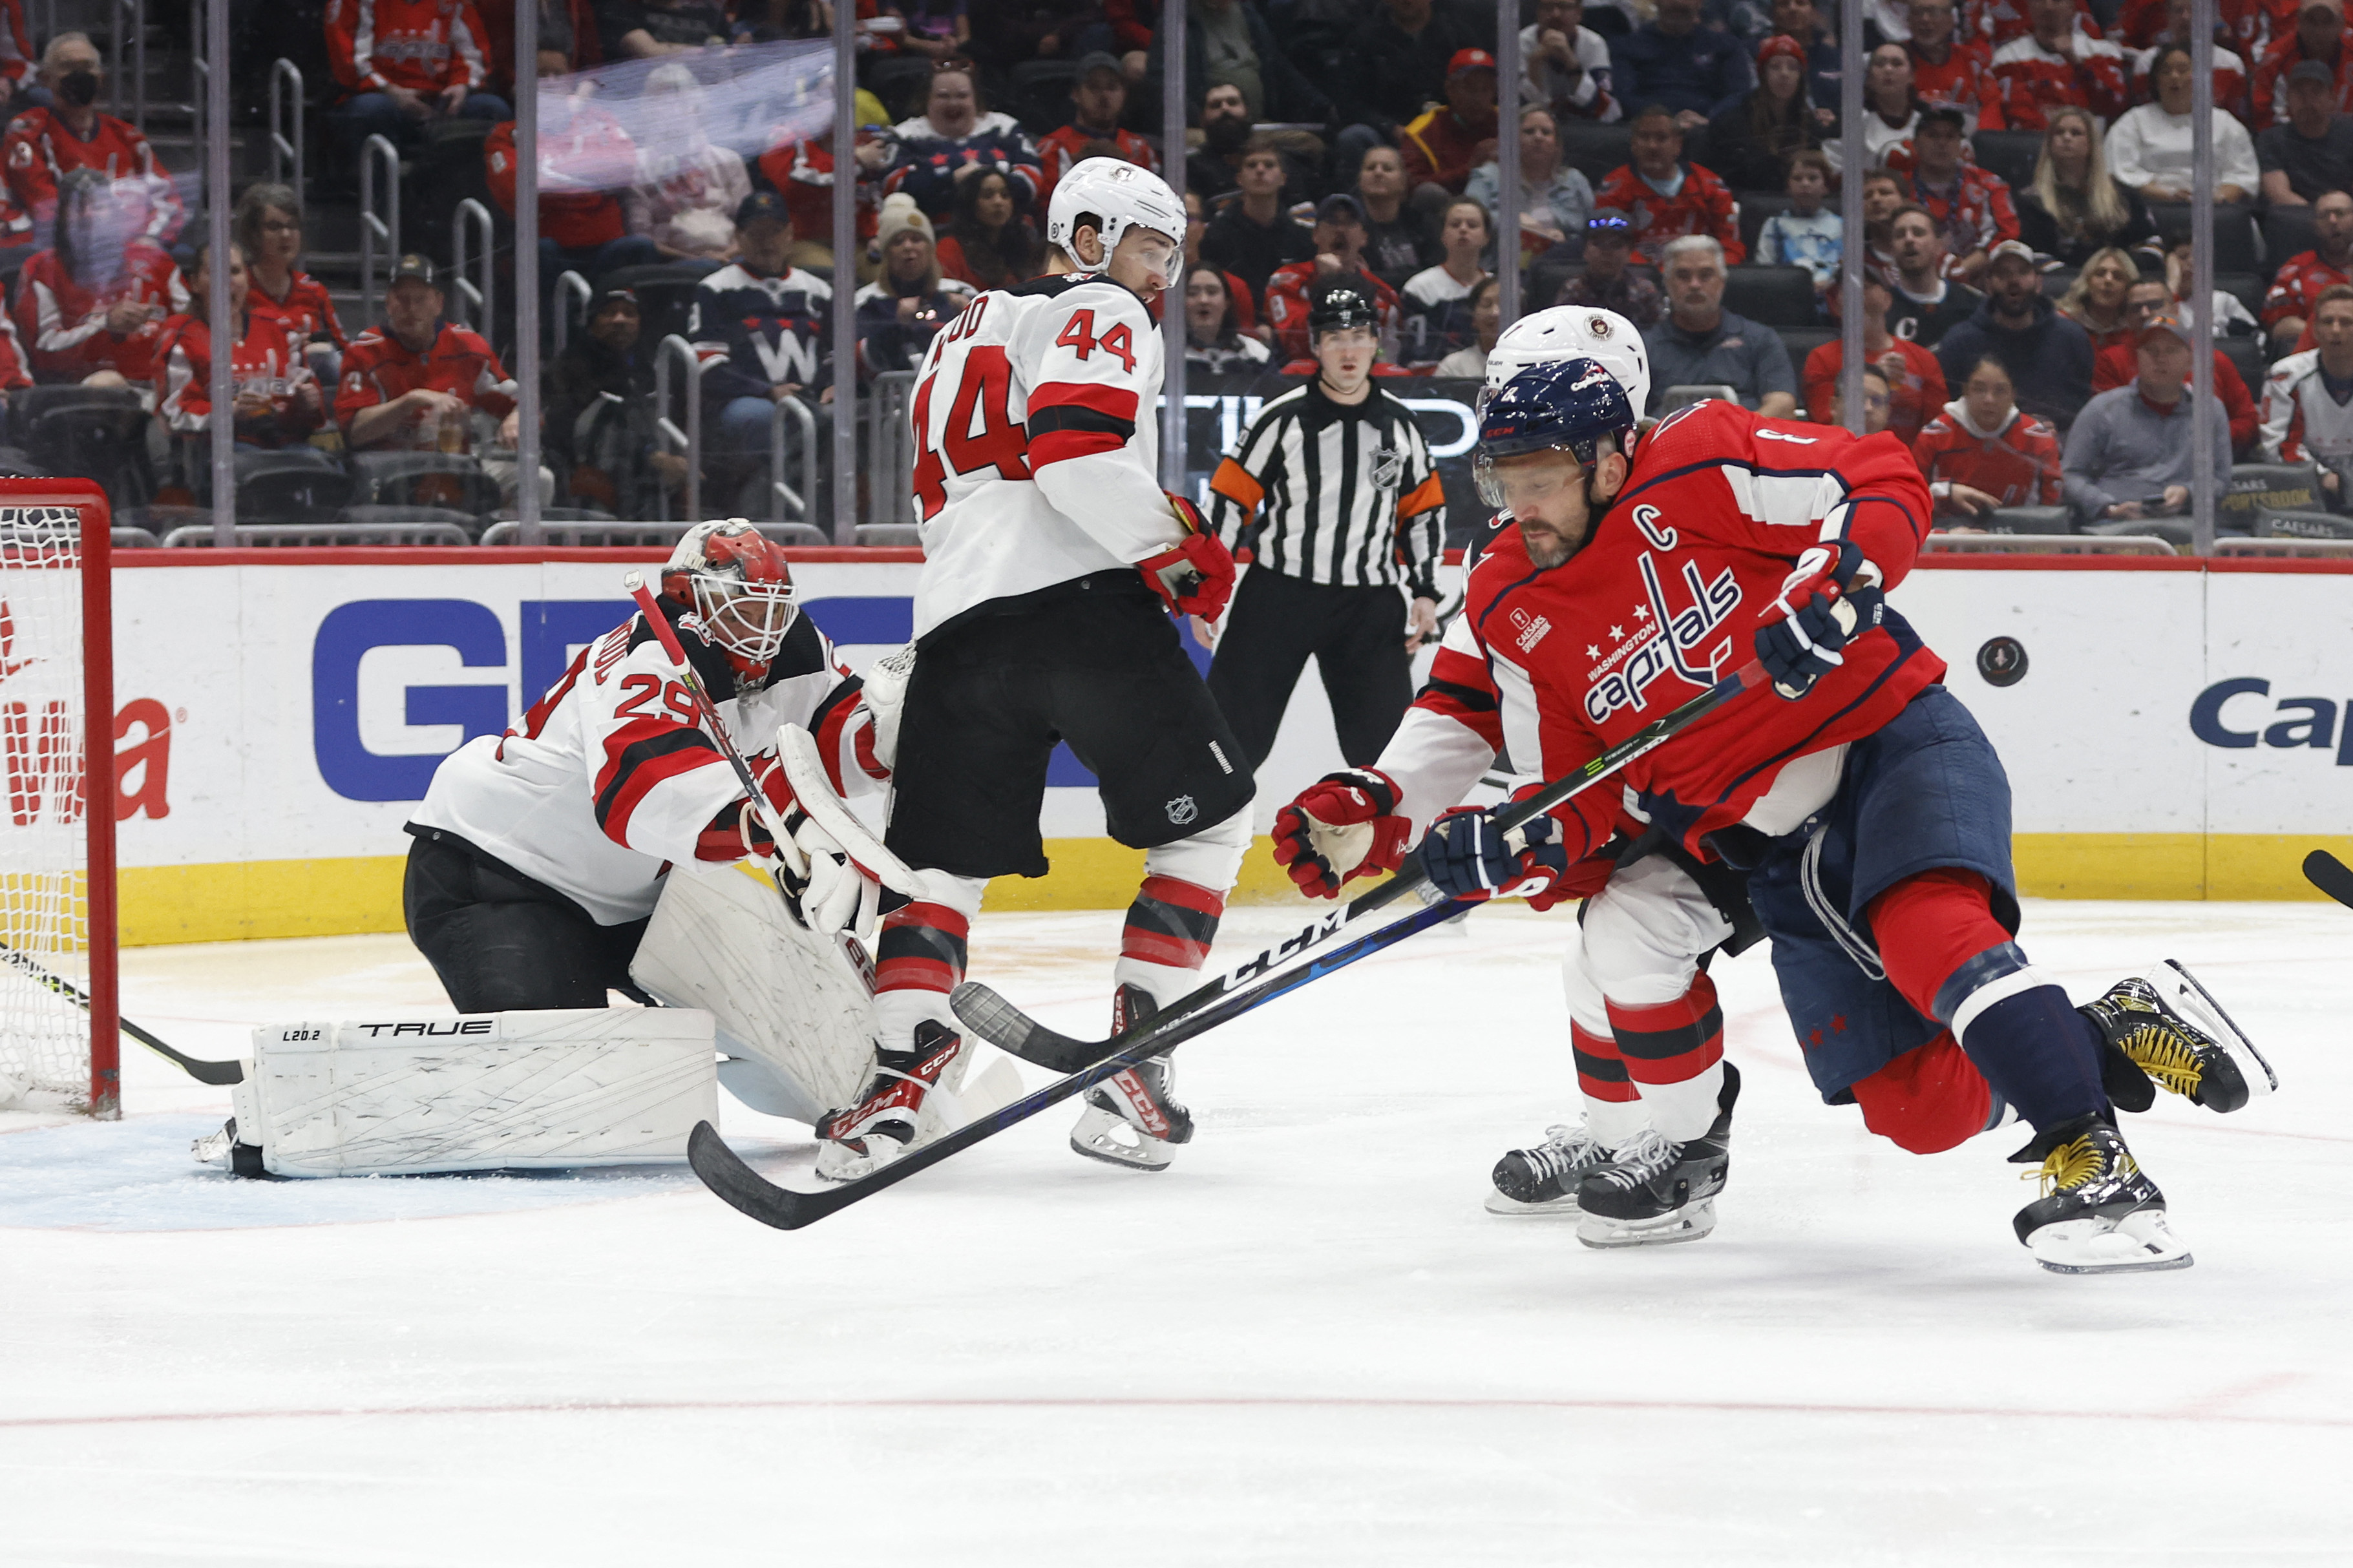 New Jersey Devils: Who should play right wing on the power play?